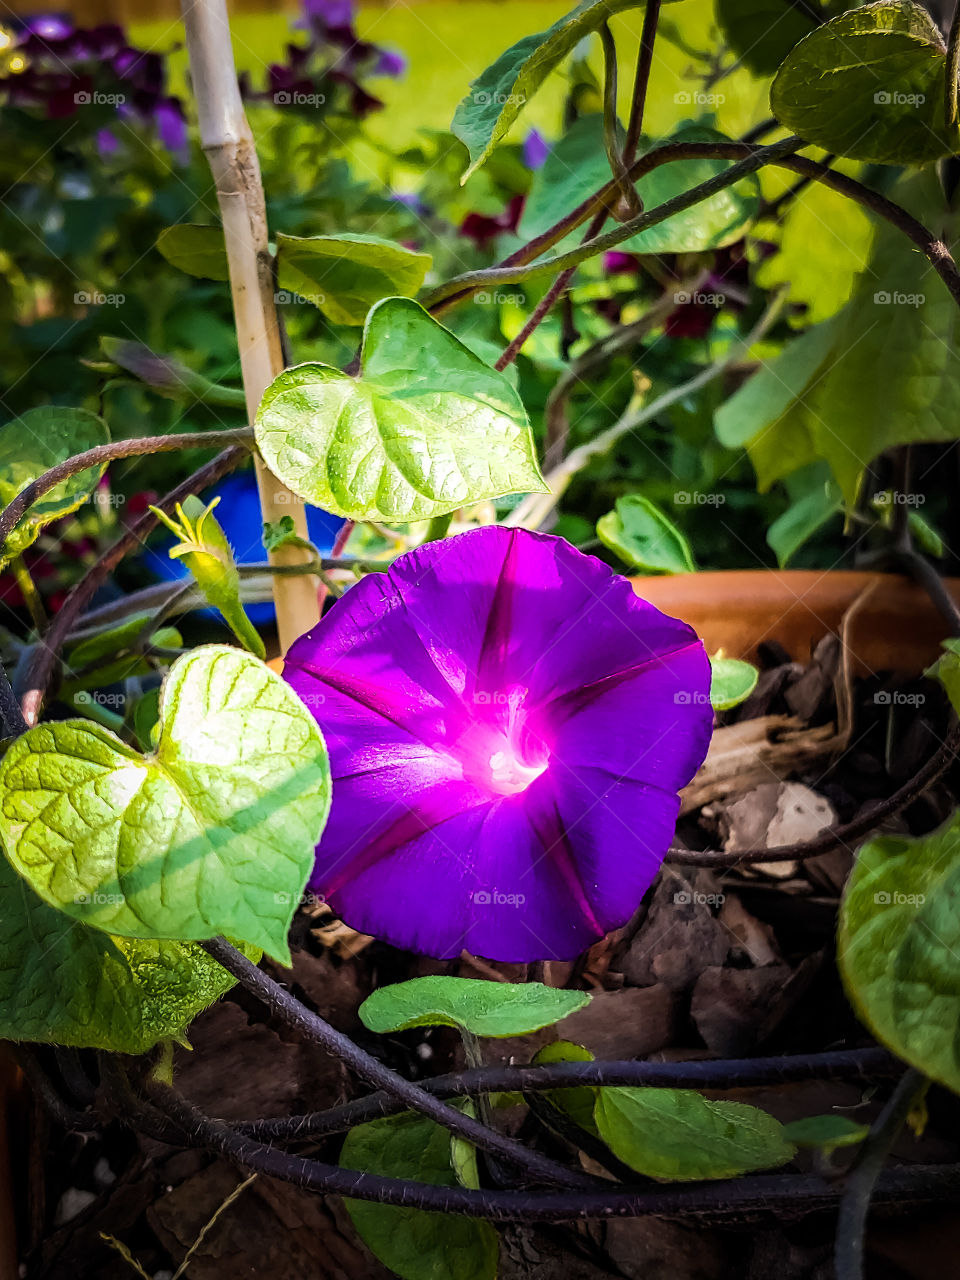 our beautiful petunias just started blooming...love how they look like they're glowing first thing in the morning!